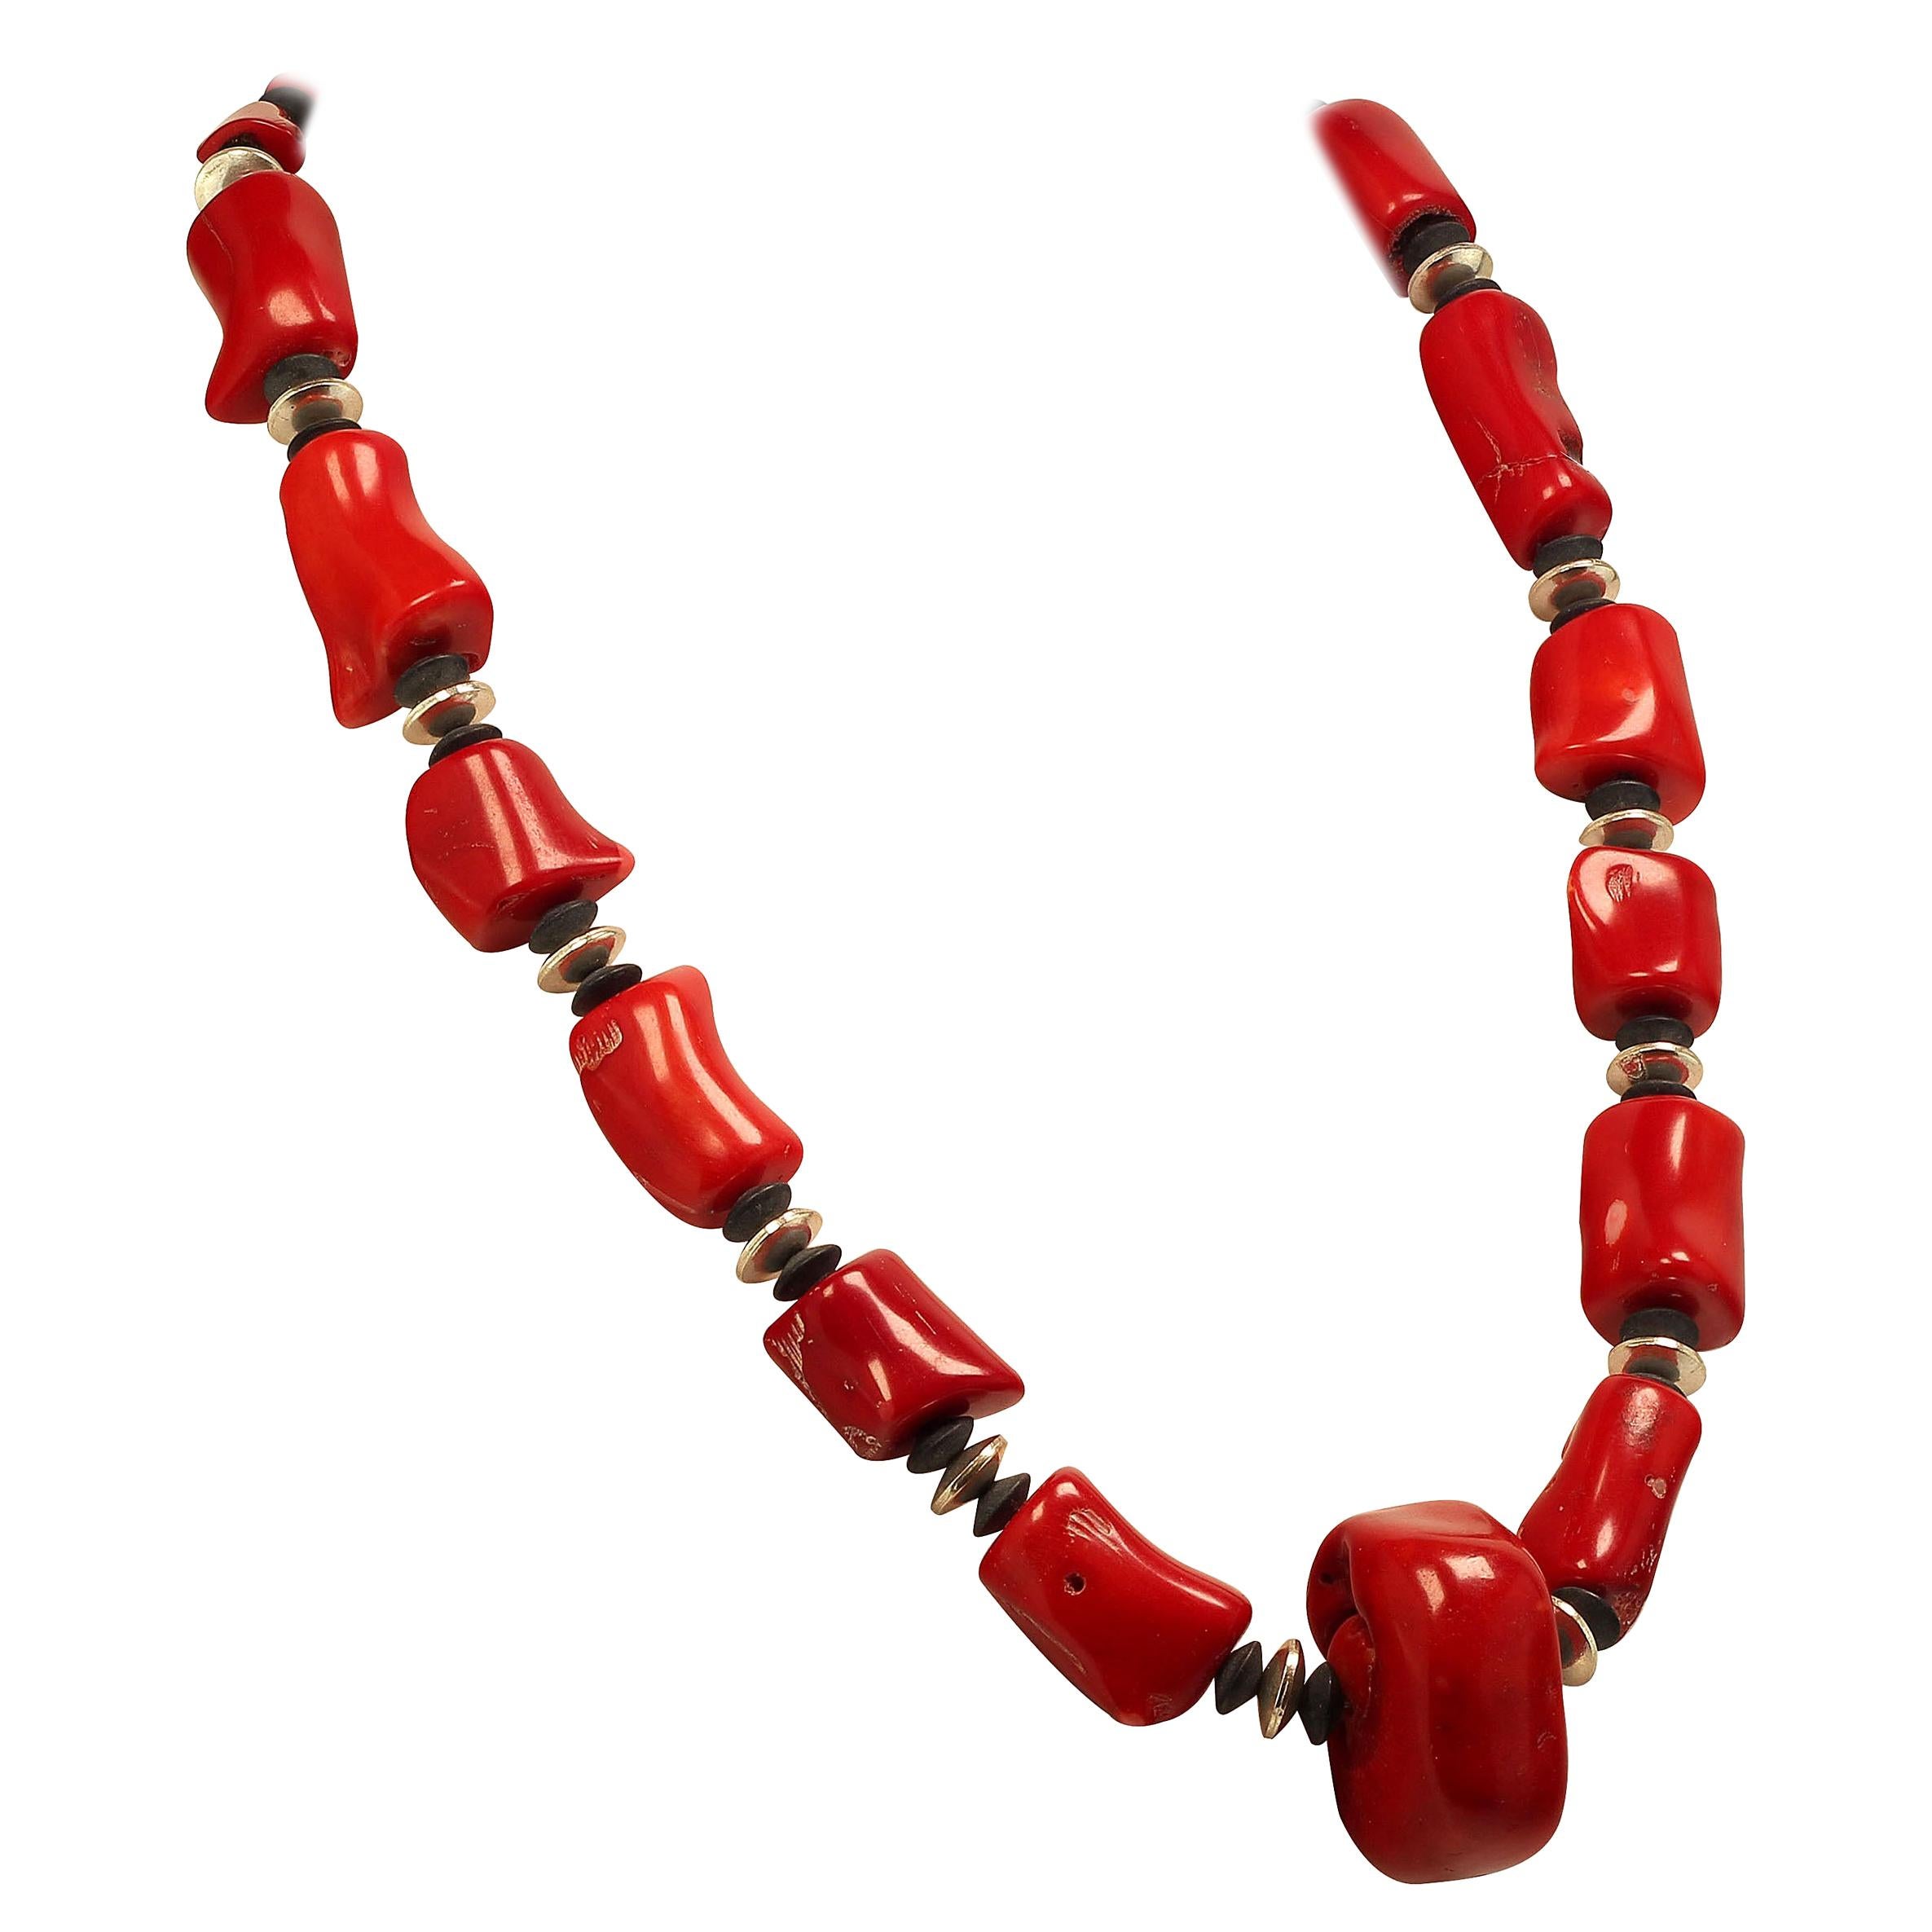 AJD Striking Necklace of Red Coral with Silver and Black Onyx Accents